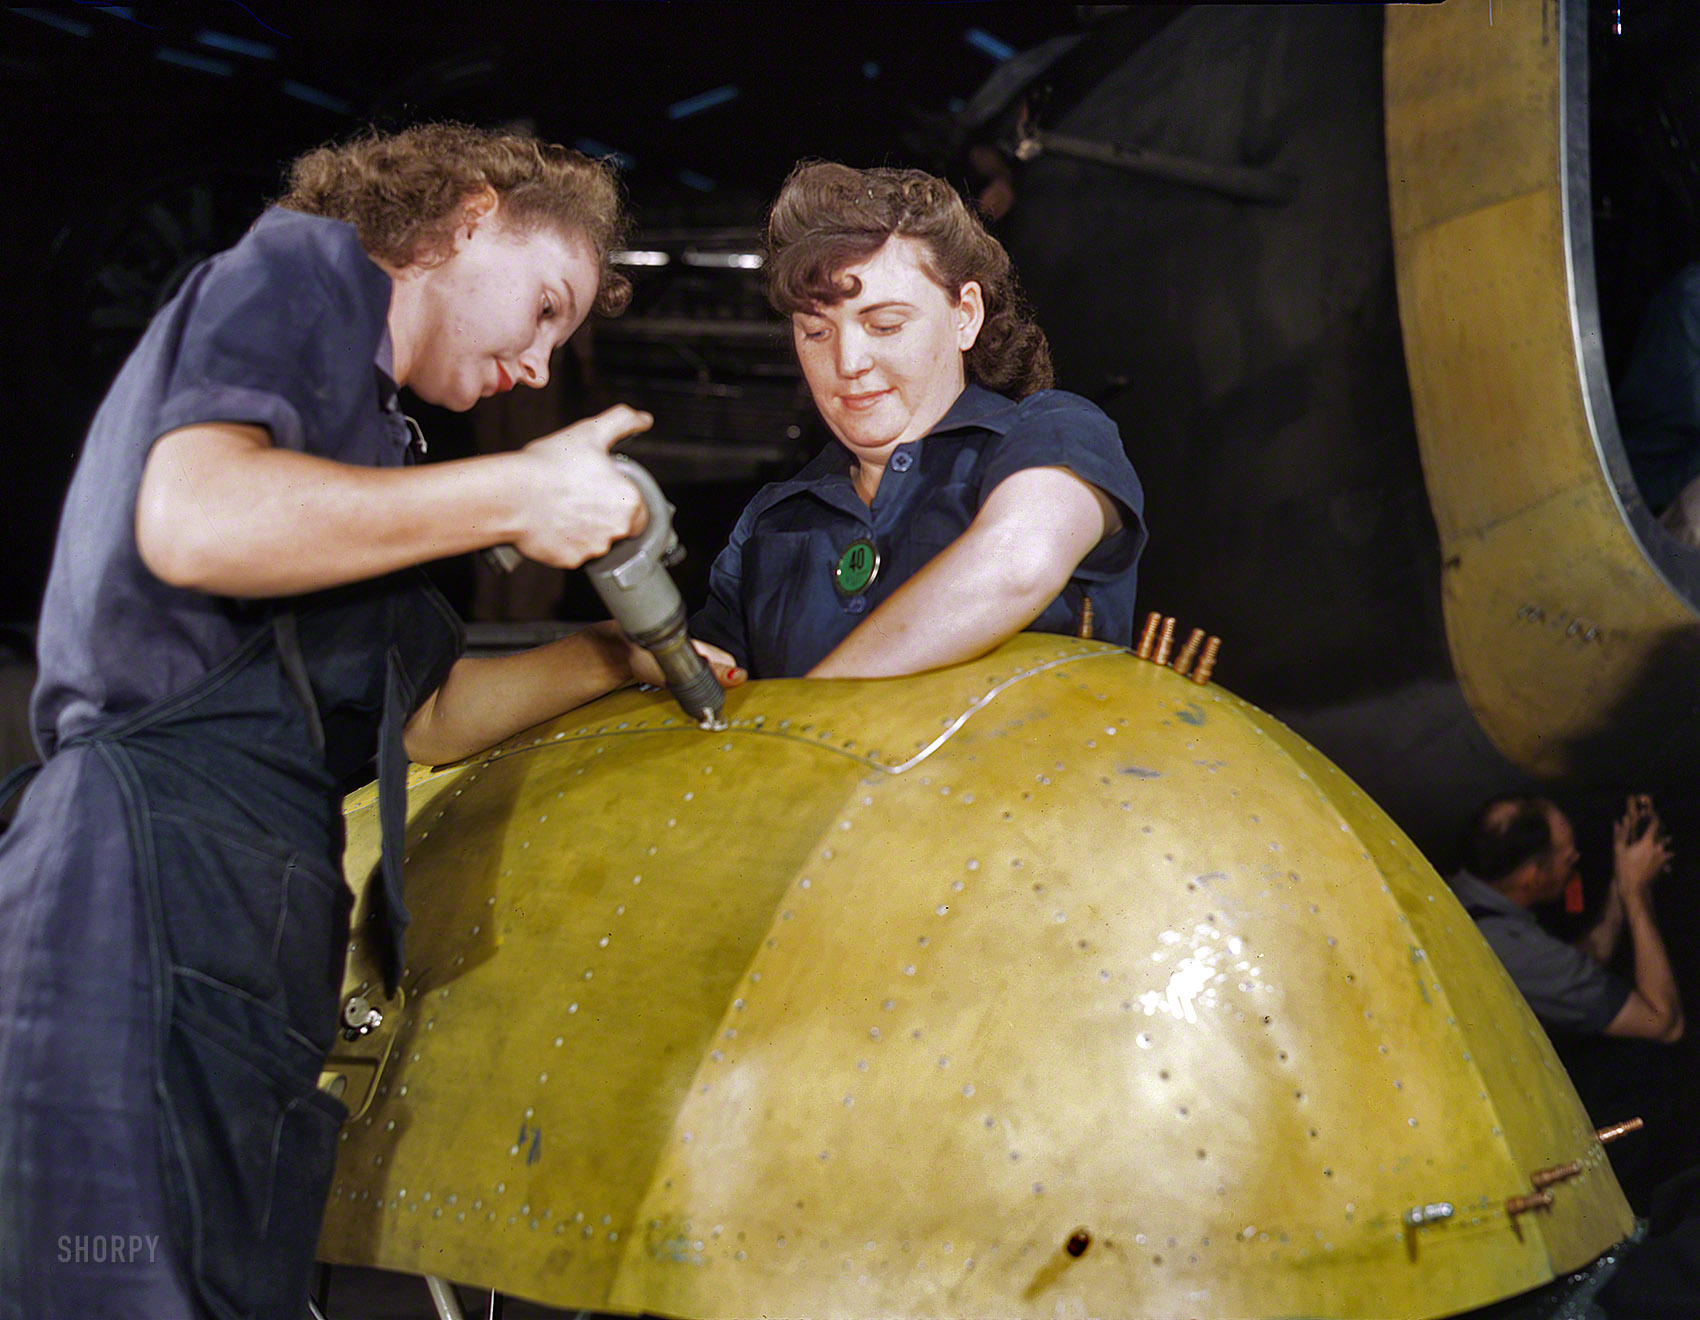 February 1943. "Working on a 'Vengeance' dive bomber at Vultee Aircraft in Nashville, Tennessee." Gunning away at the Axis, one rivet at a time. Kodachrome transparency by Alfred Palmer, Office of War Information. View full size.